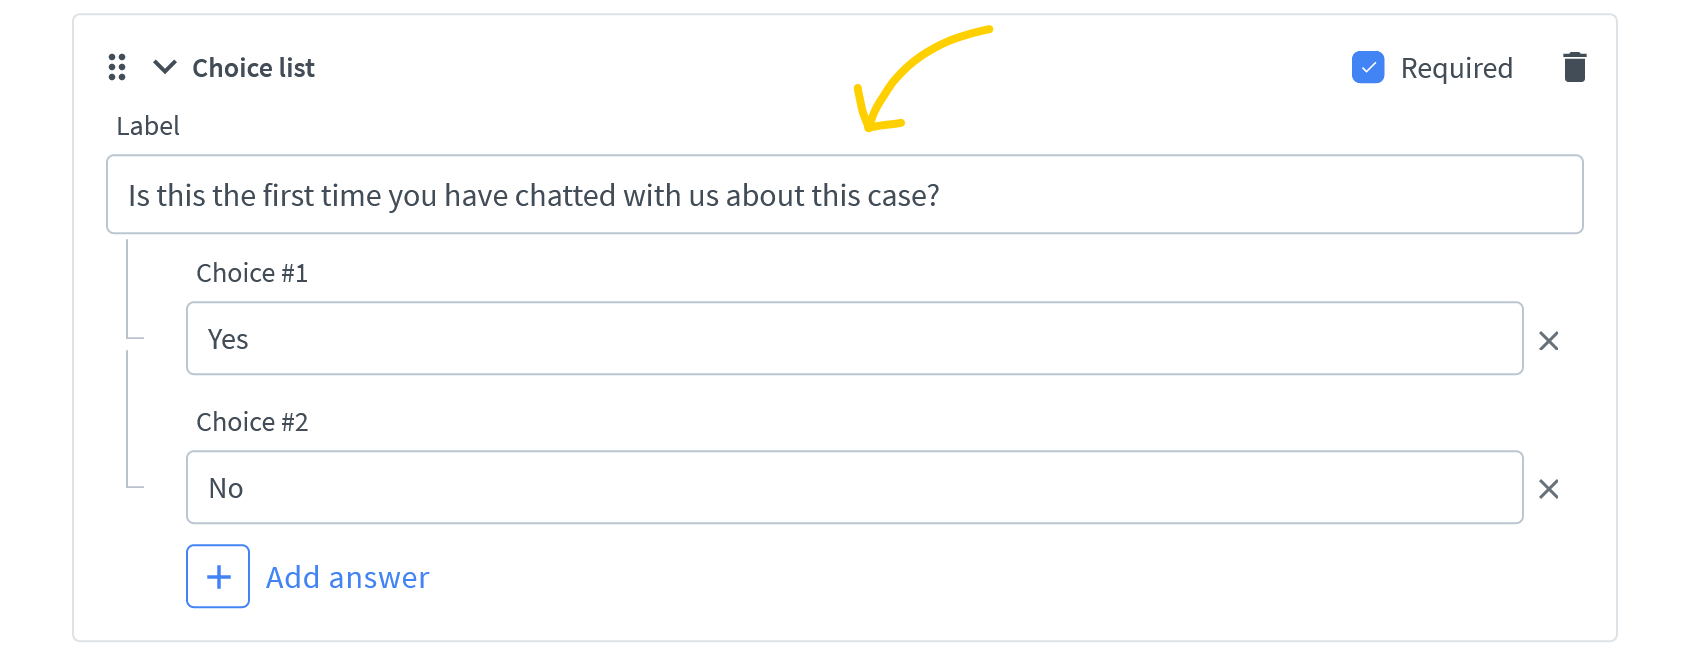 Fill in labels in post chat form fields